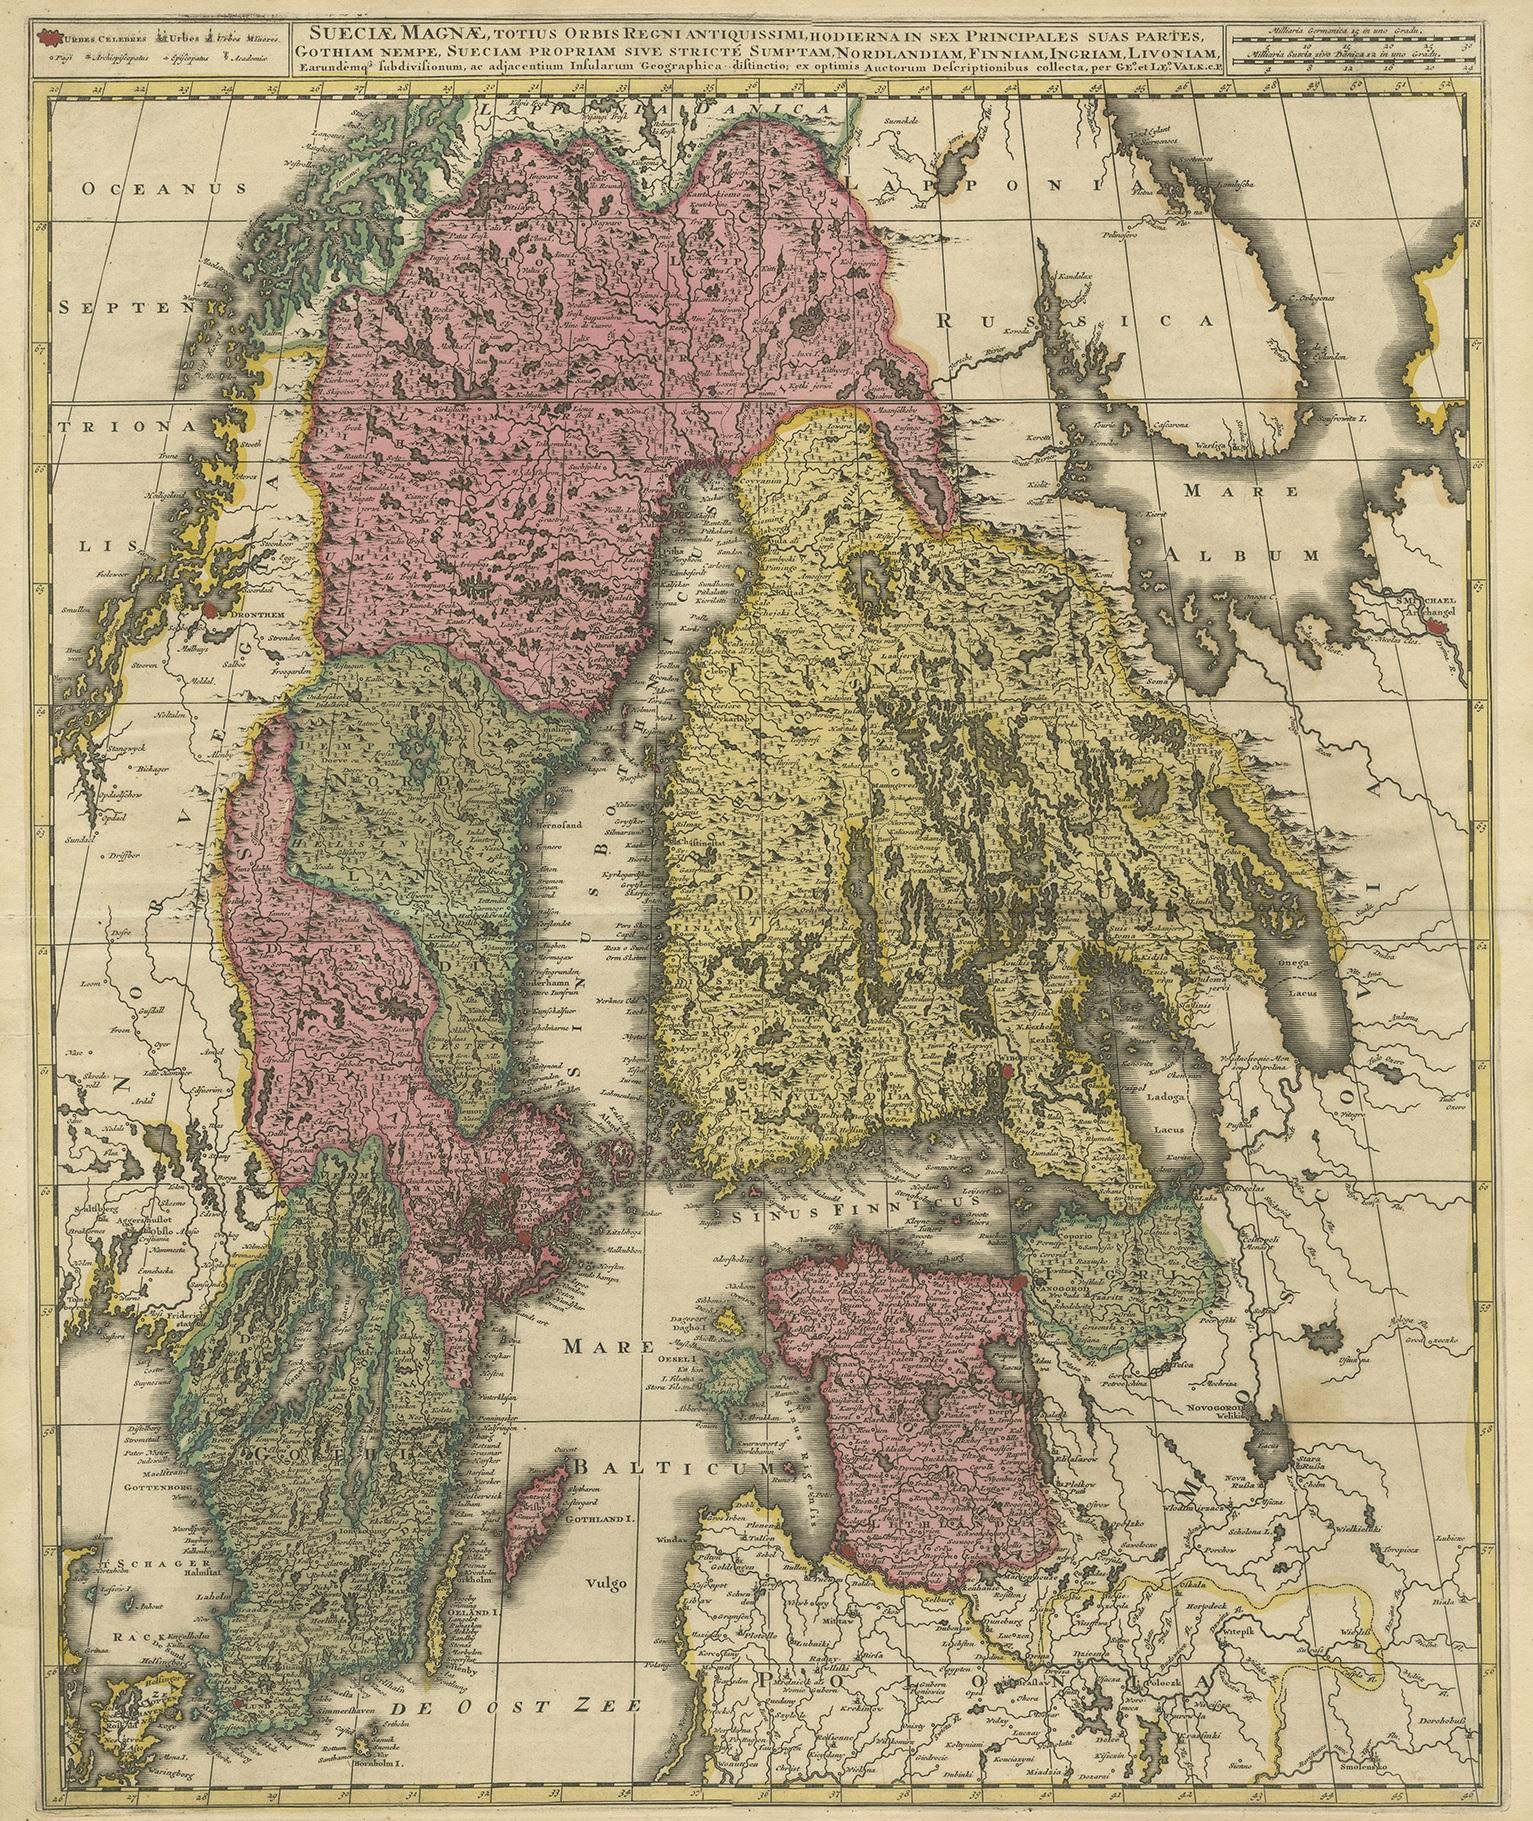 Antique map titled 'Sueciae Magnae, totius orbis regni antiquissimi (..)'. Map of Scandinavia and the Baltic region. It shows Norway, Sweden, Finland, Estonia and Latvia. Published by G. and L. Valk.